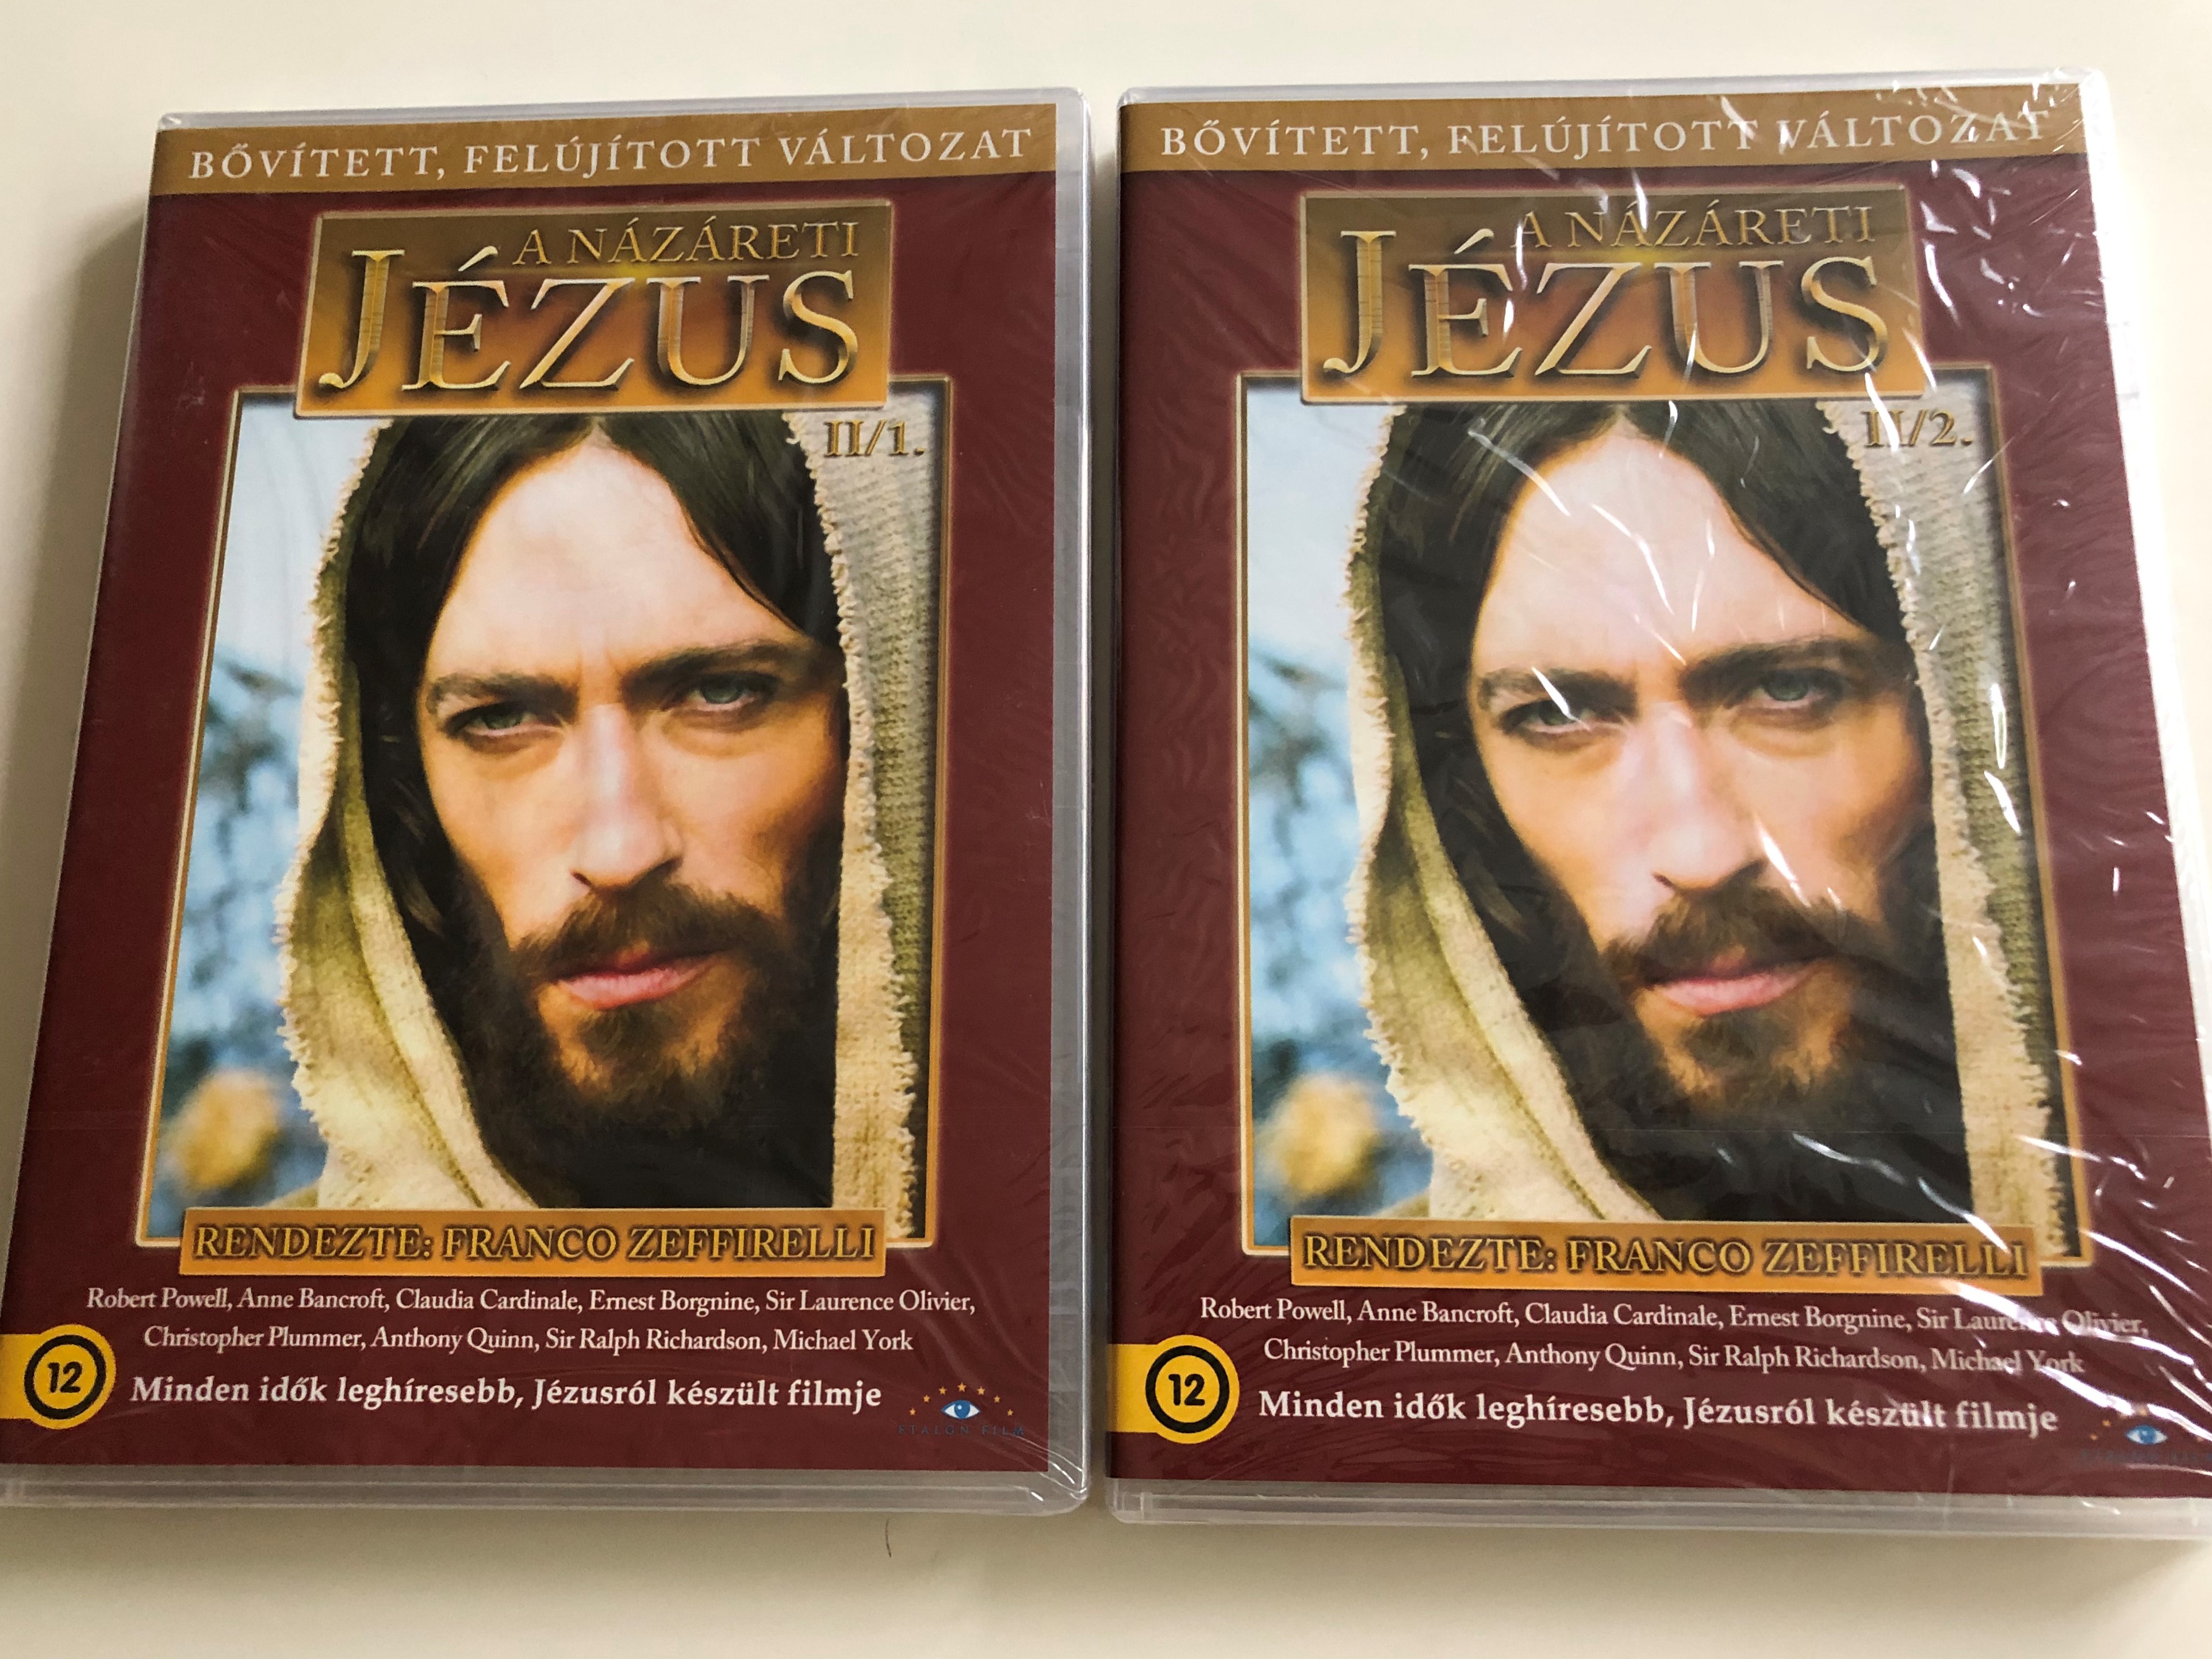 jesus-of-nazareth-dvd-set-1977-a-n-z-reti-j-zus-directed-by-franco-zeffirelli-starring-robert-powell-anne-bancroft-claudia-cardinale-valentina-cortese-ian-mcshane-sir-laurence-olivier-extended-remastered-edition-2-d-1-.jpg